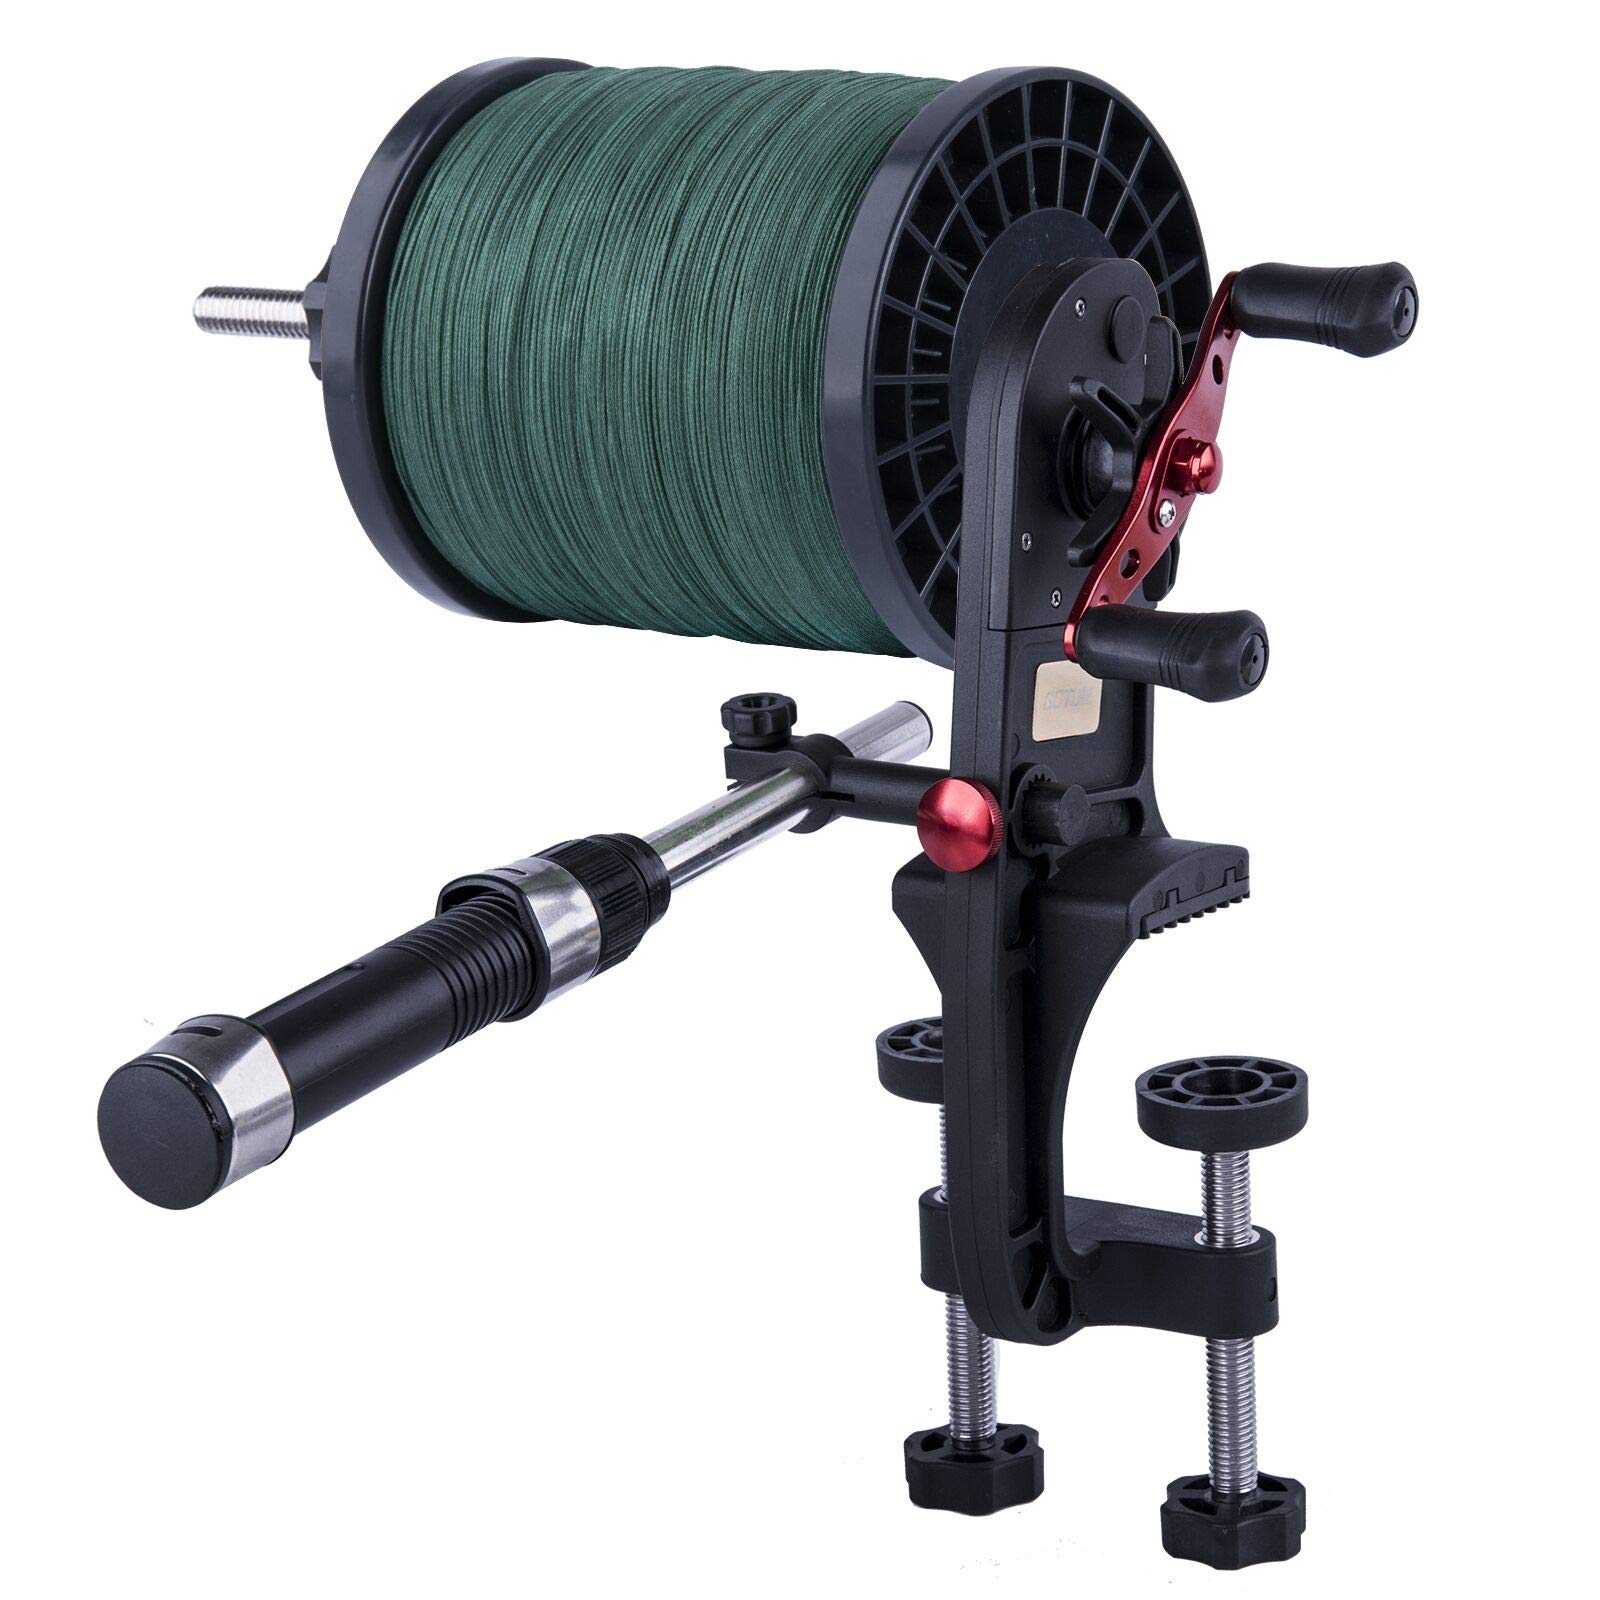 New Fishing Line Winder Portable Reel Line Recycle Spooler Machine